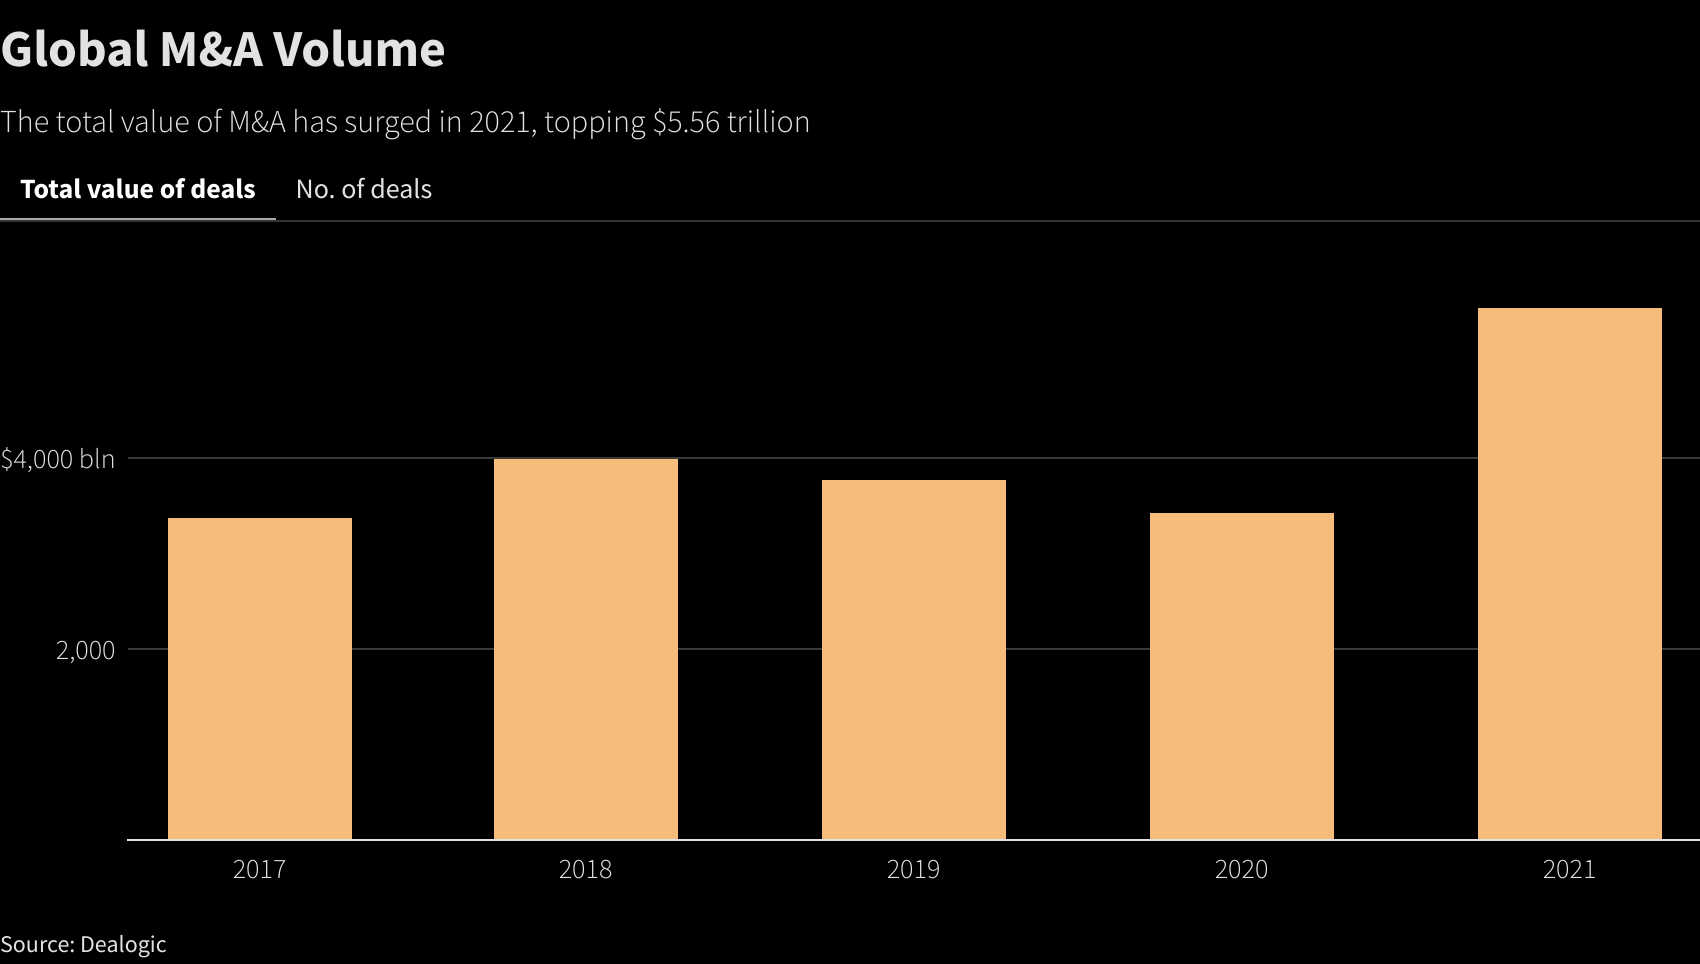 Global M&A activity smashes all-time records to top $5 trillion in 2021